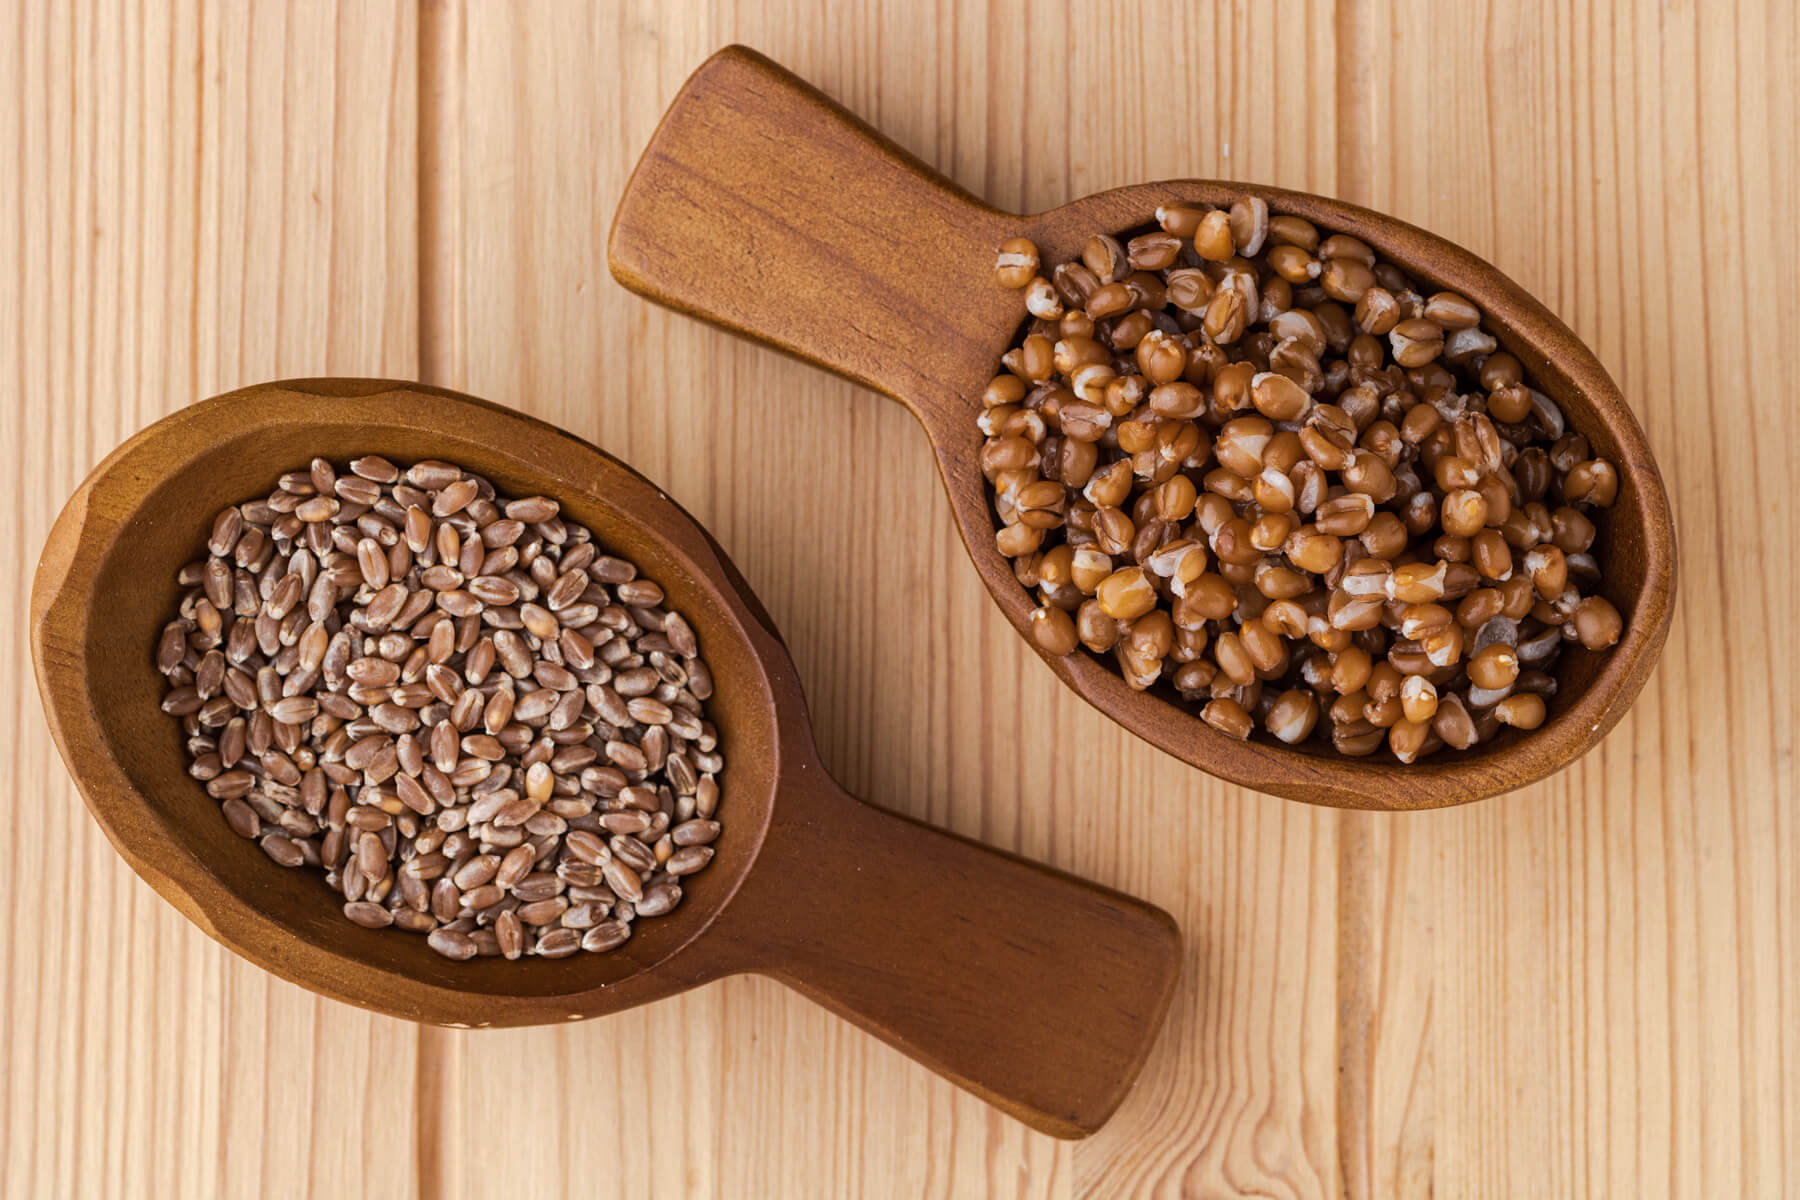 Two wooden scoops comparing uncooked durum wheat to cooked wheat berries.